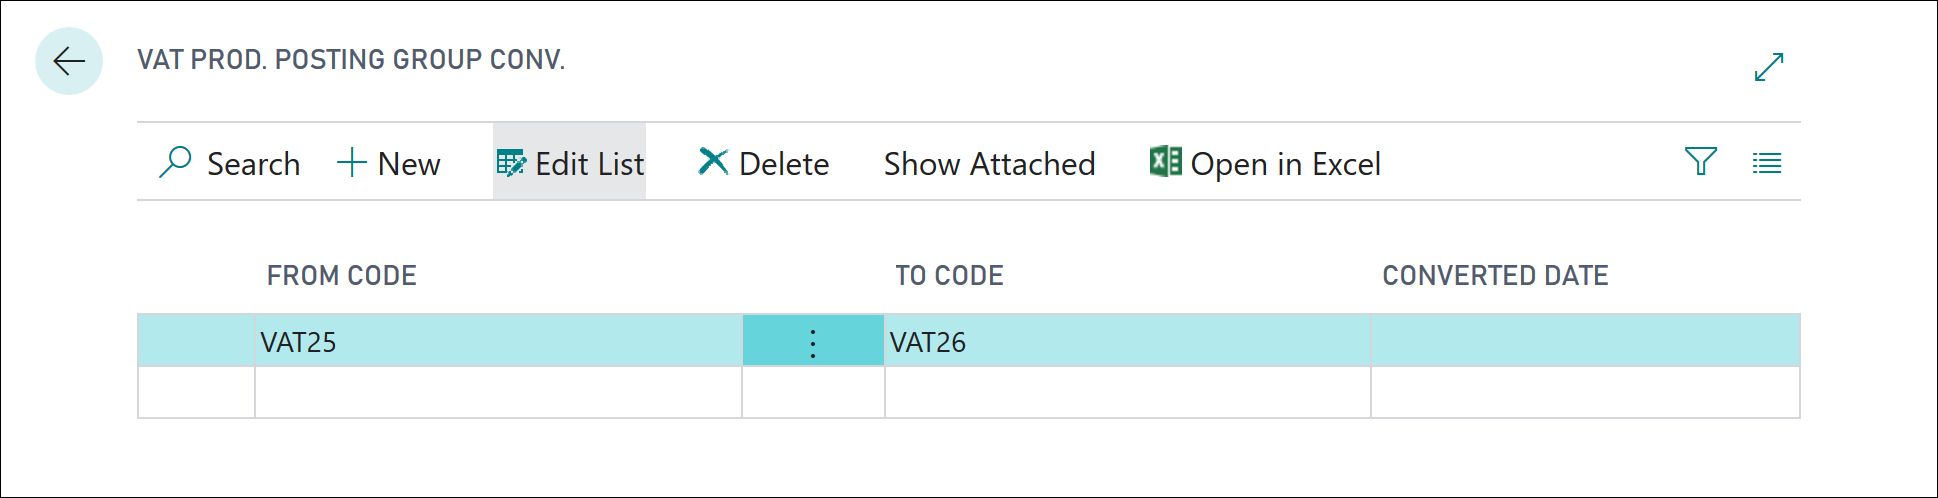 Screenshot of the VAT product posting group conversion window.